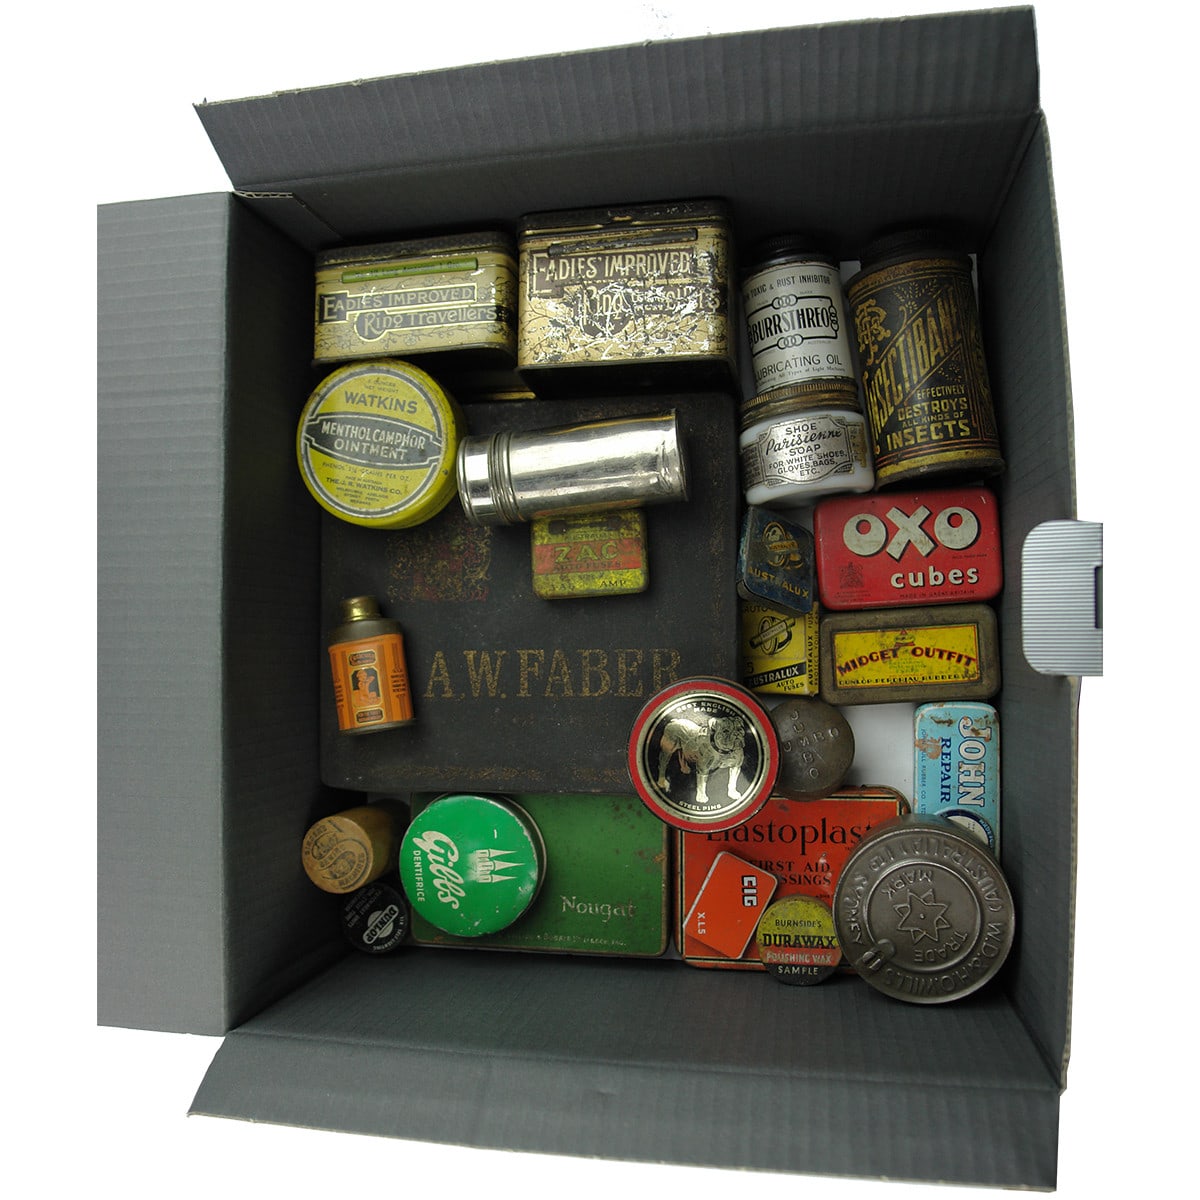 26 Tins/Containers. Interesting products. Faber tin has a great picture to inner lid. Useful group.